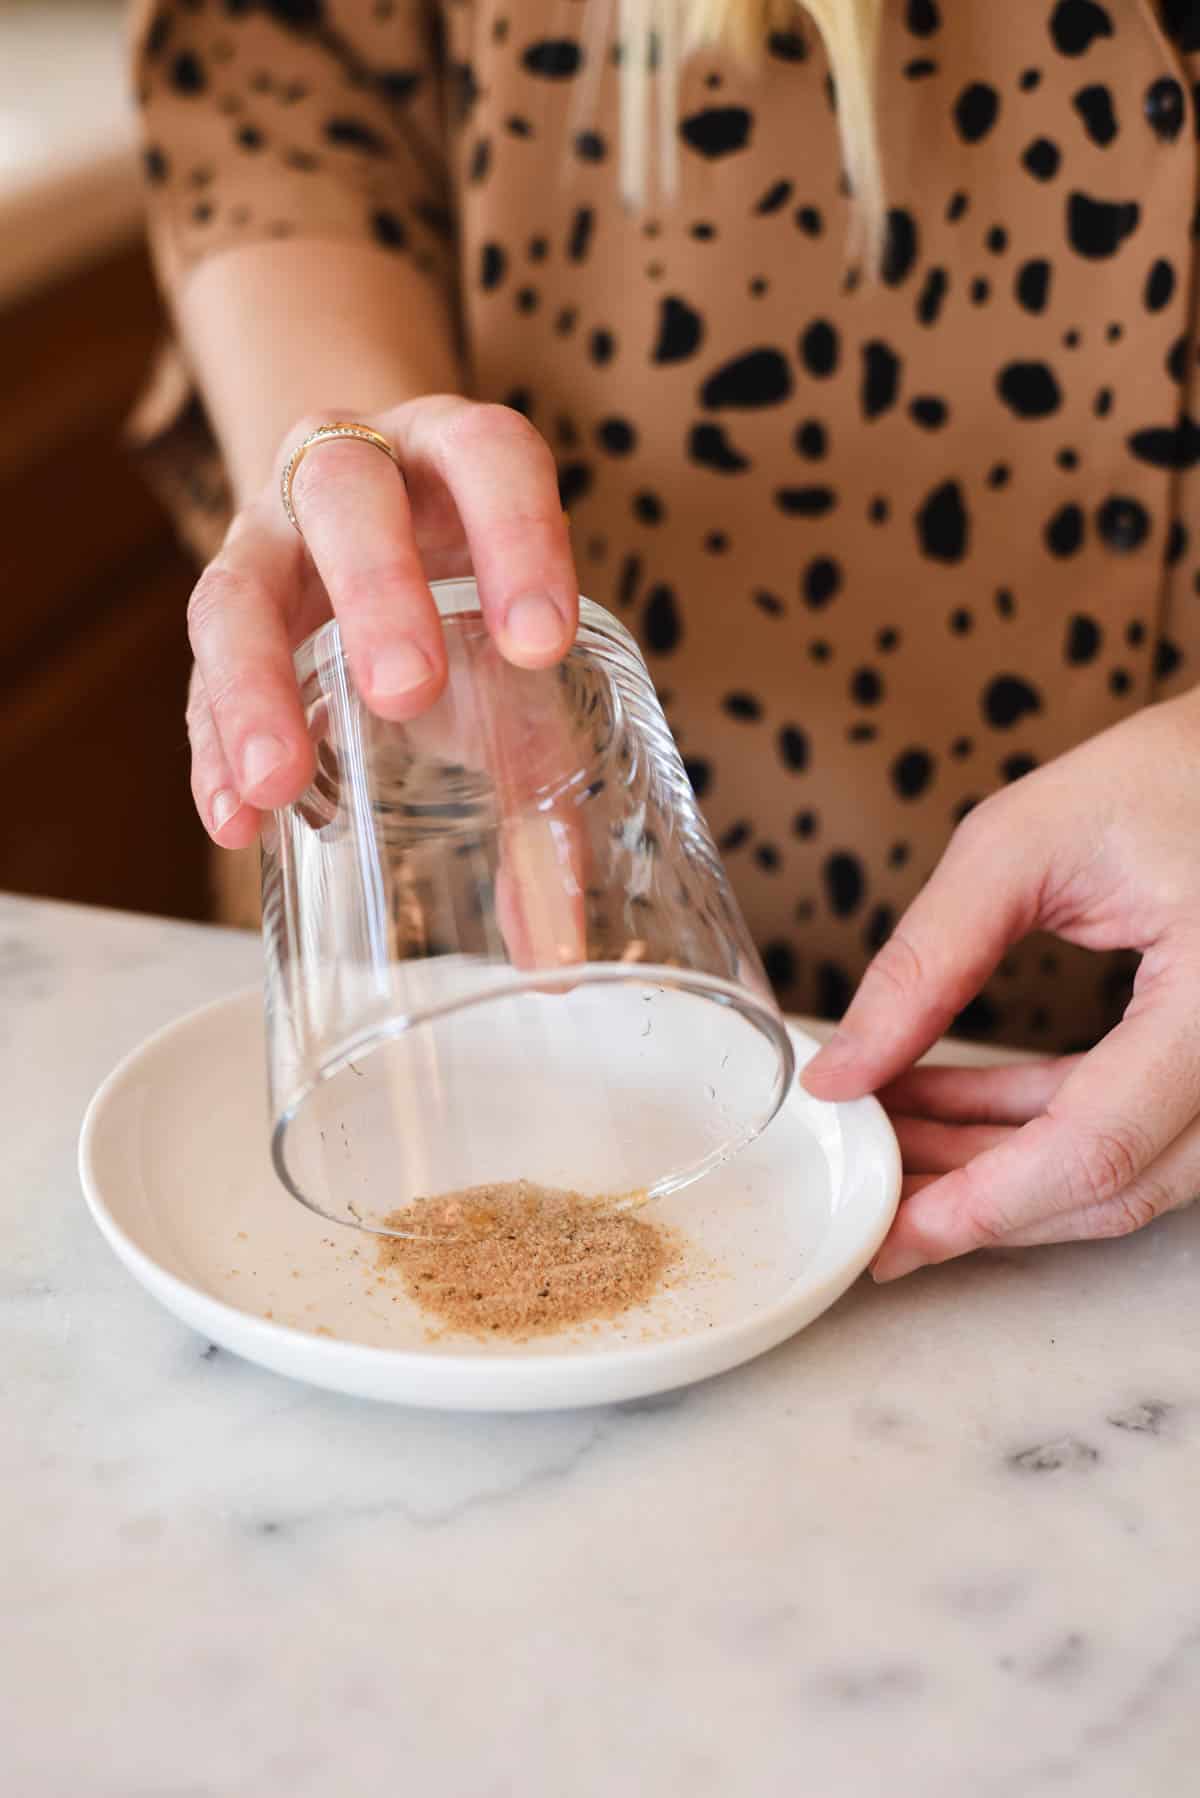 Woman dipping a cocktail glass in spiced sugar on a small plate.